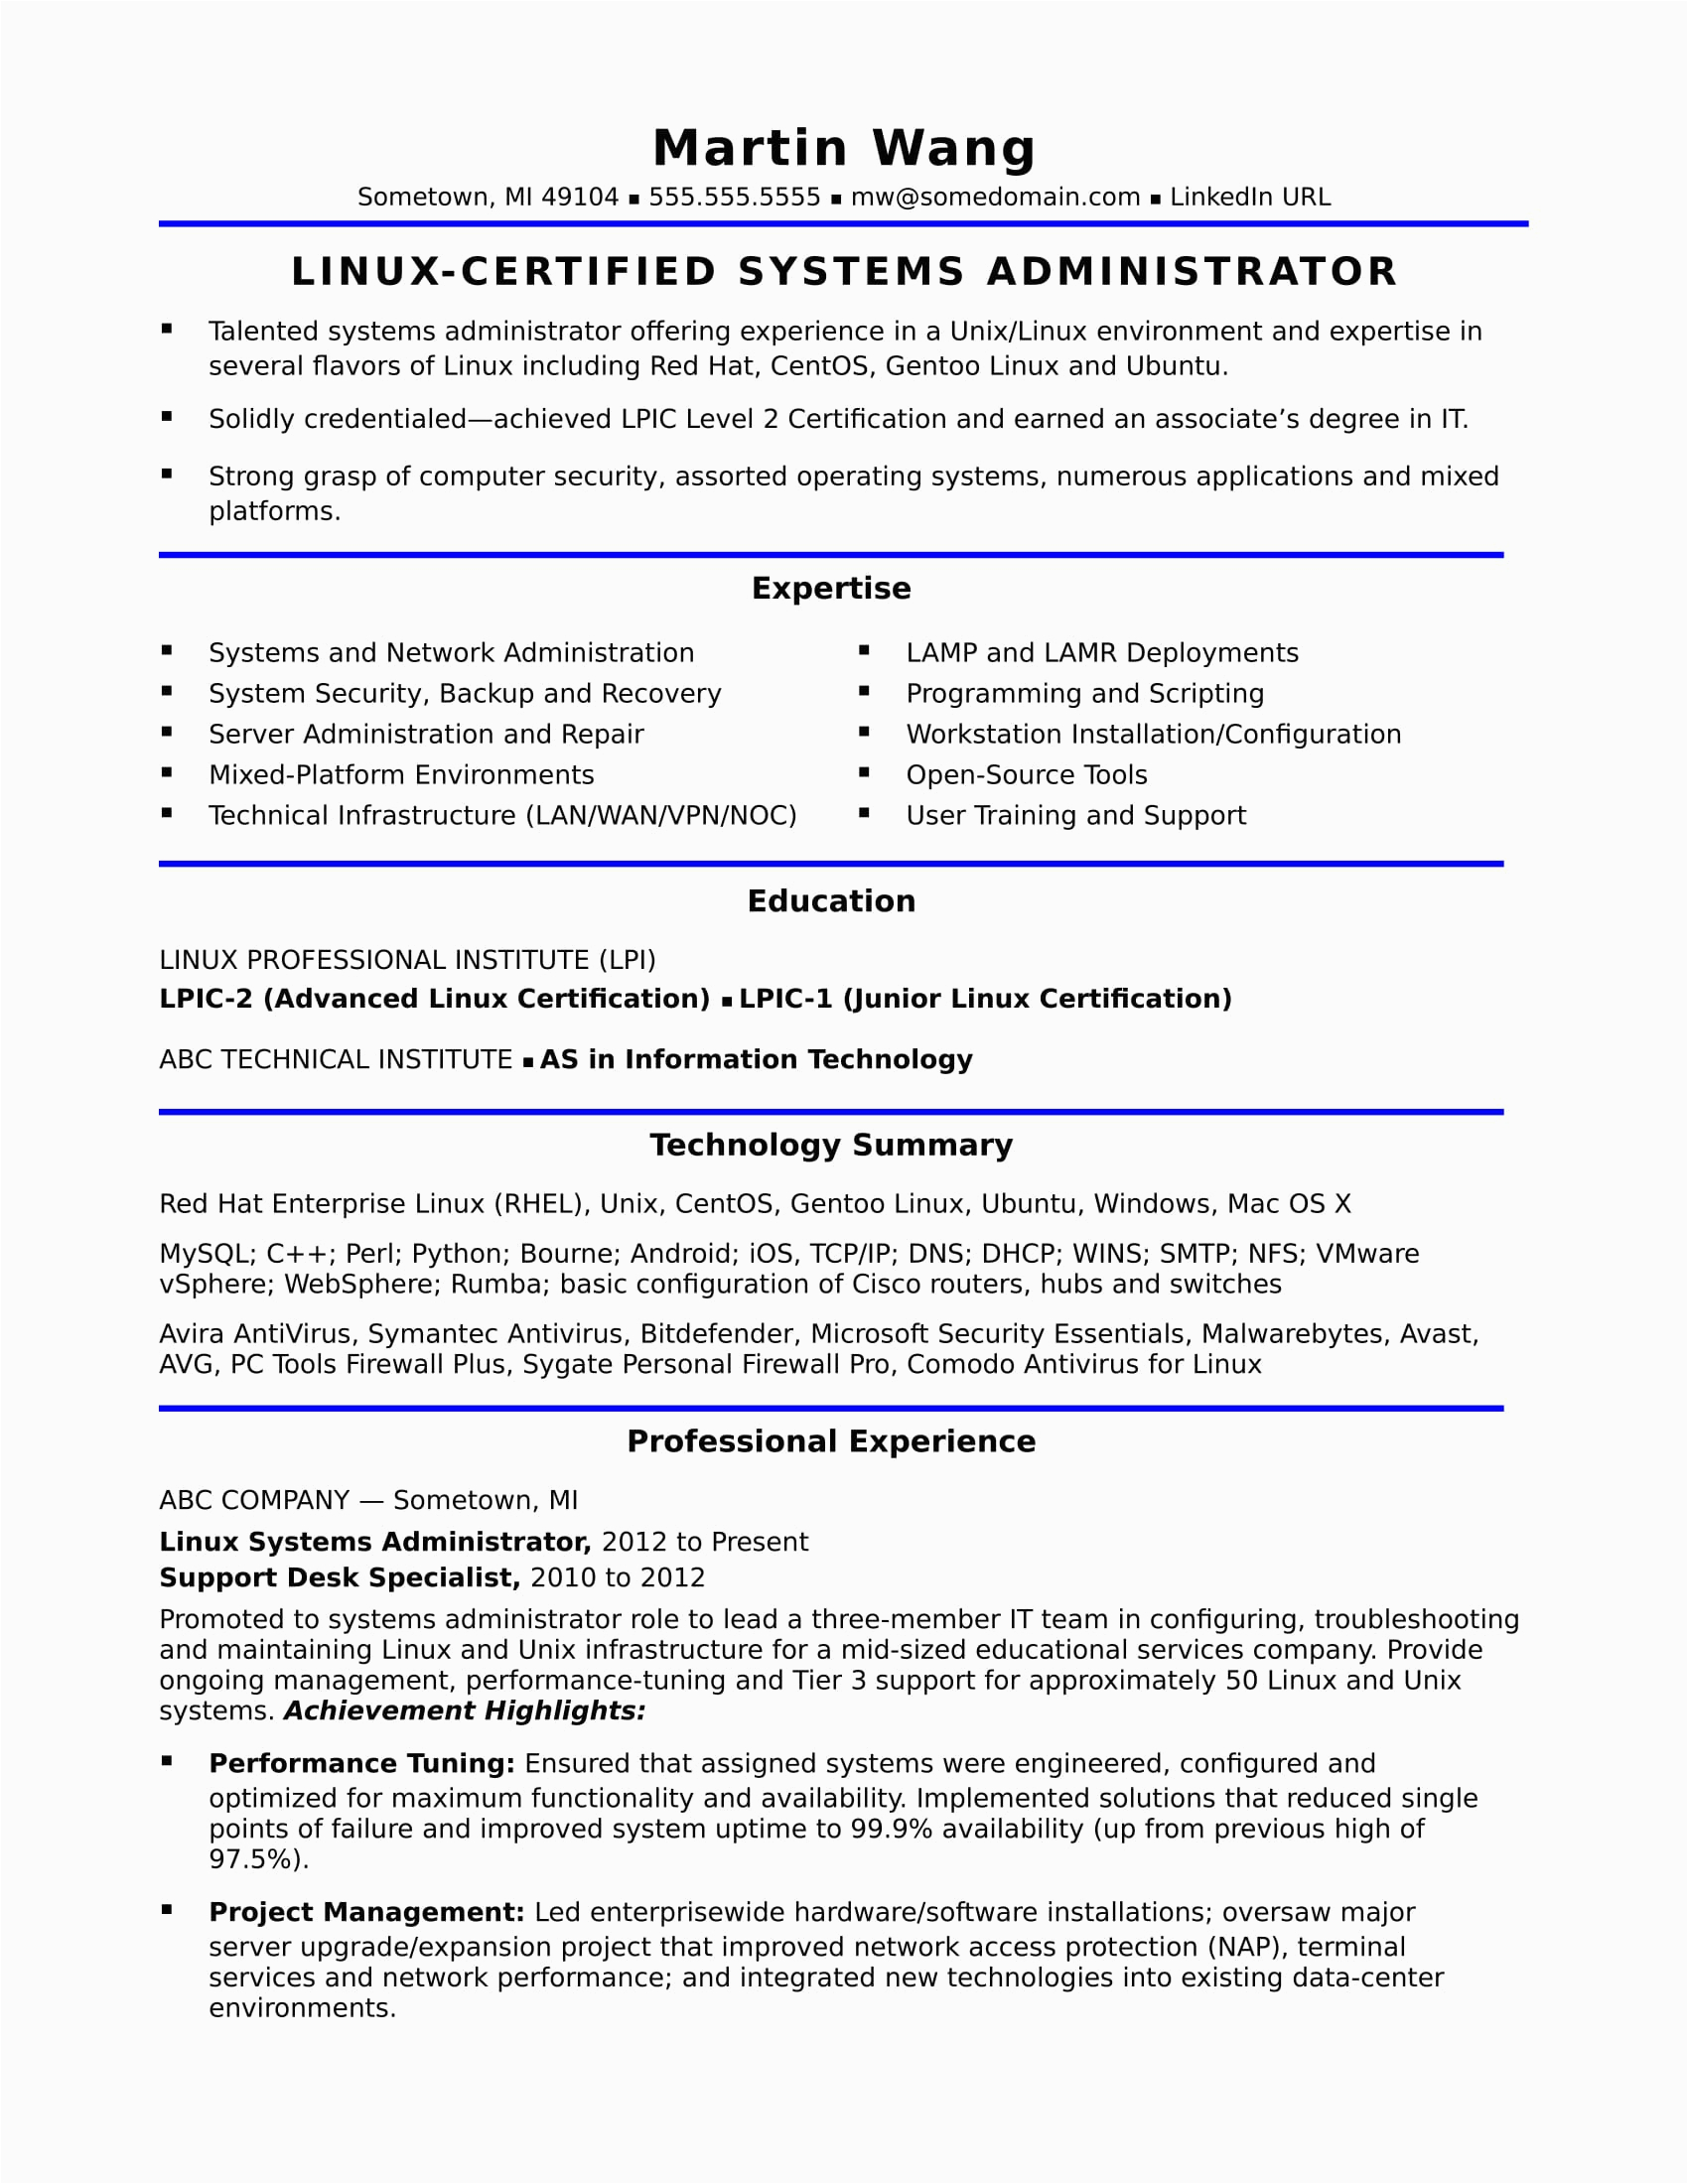 Sample Resumes for Linux System Administrator Basic Linux Resume Free Resume Template